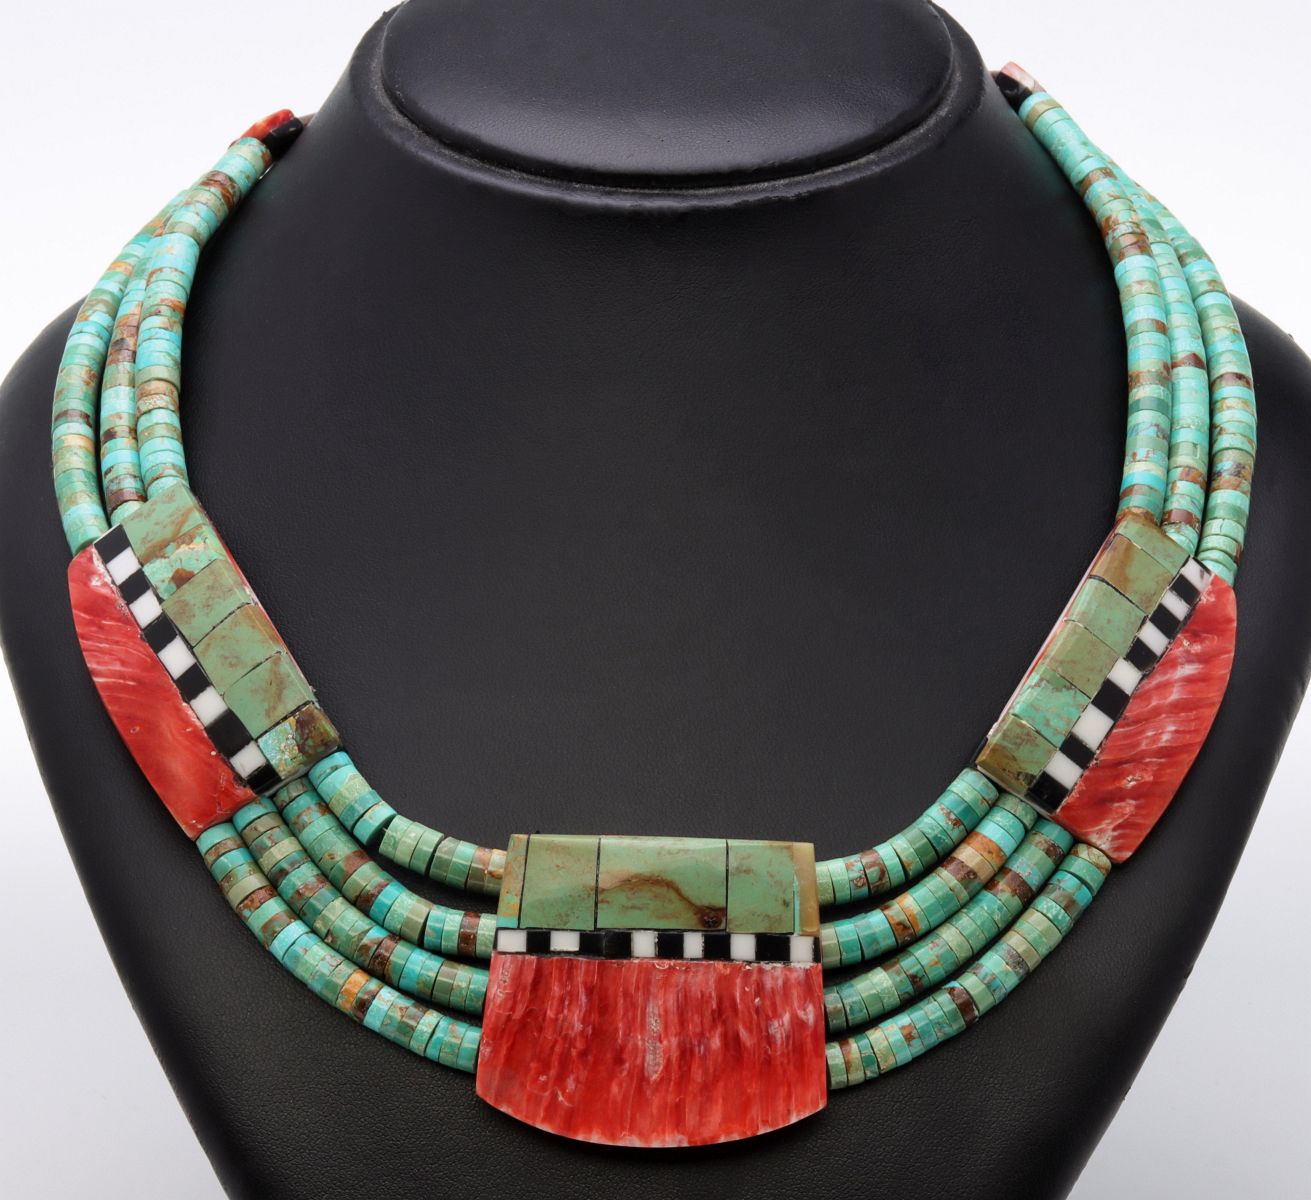 SANTO DOMINGO TURQUOISE NECKLACE WITH INLAID MEDALLIONS